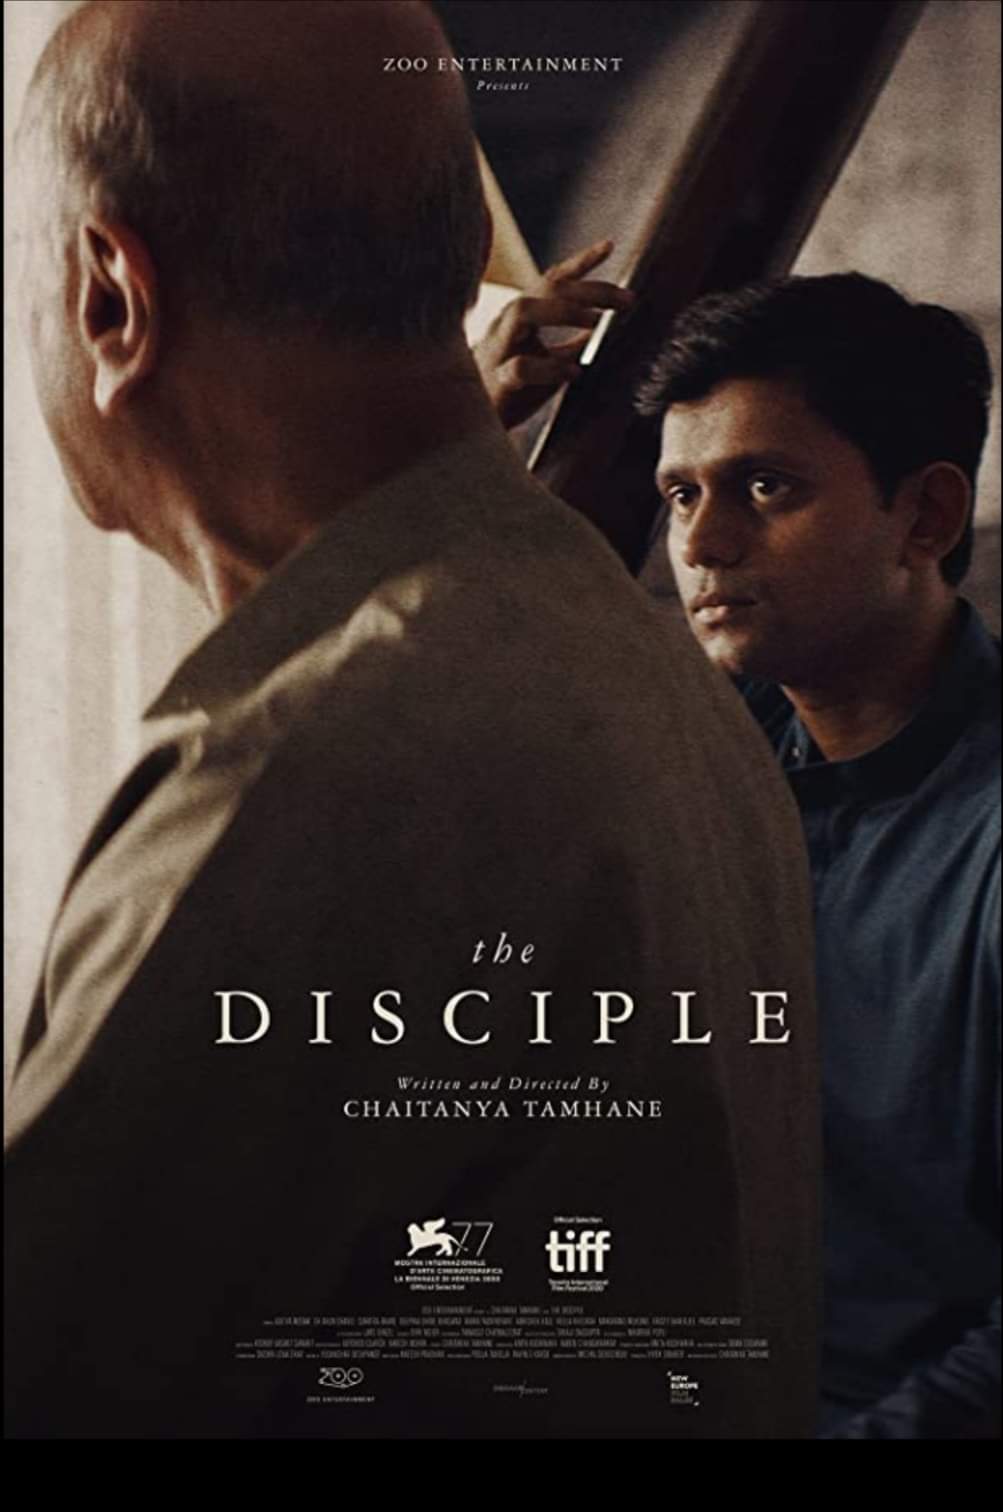 The Disciple was also selected as the only Indian film this year among the official selection of the 2020 Toronto International Film Festival